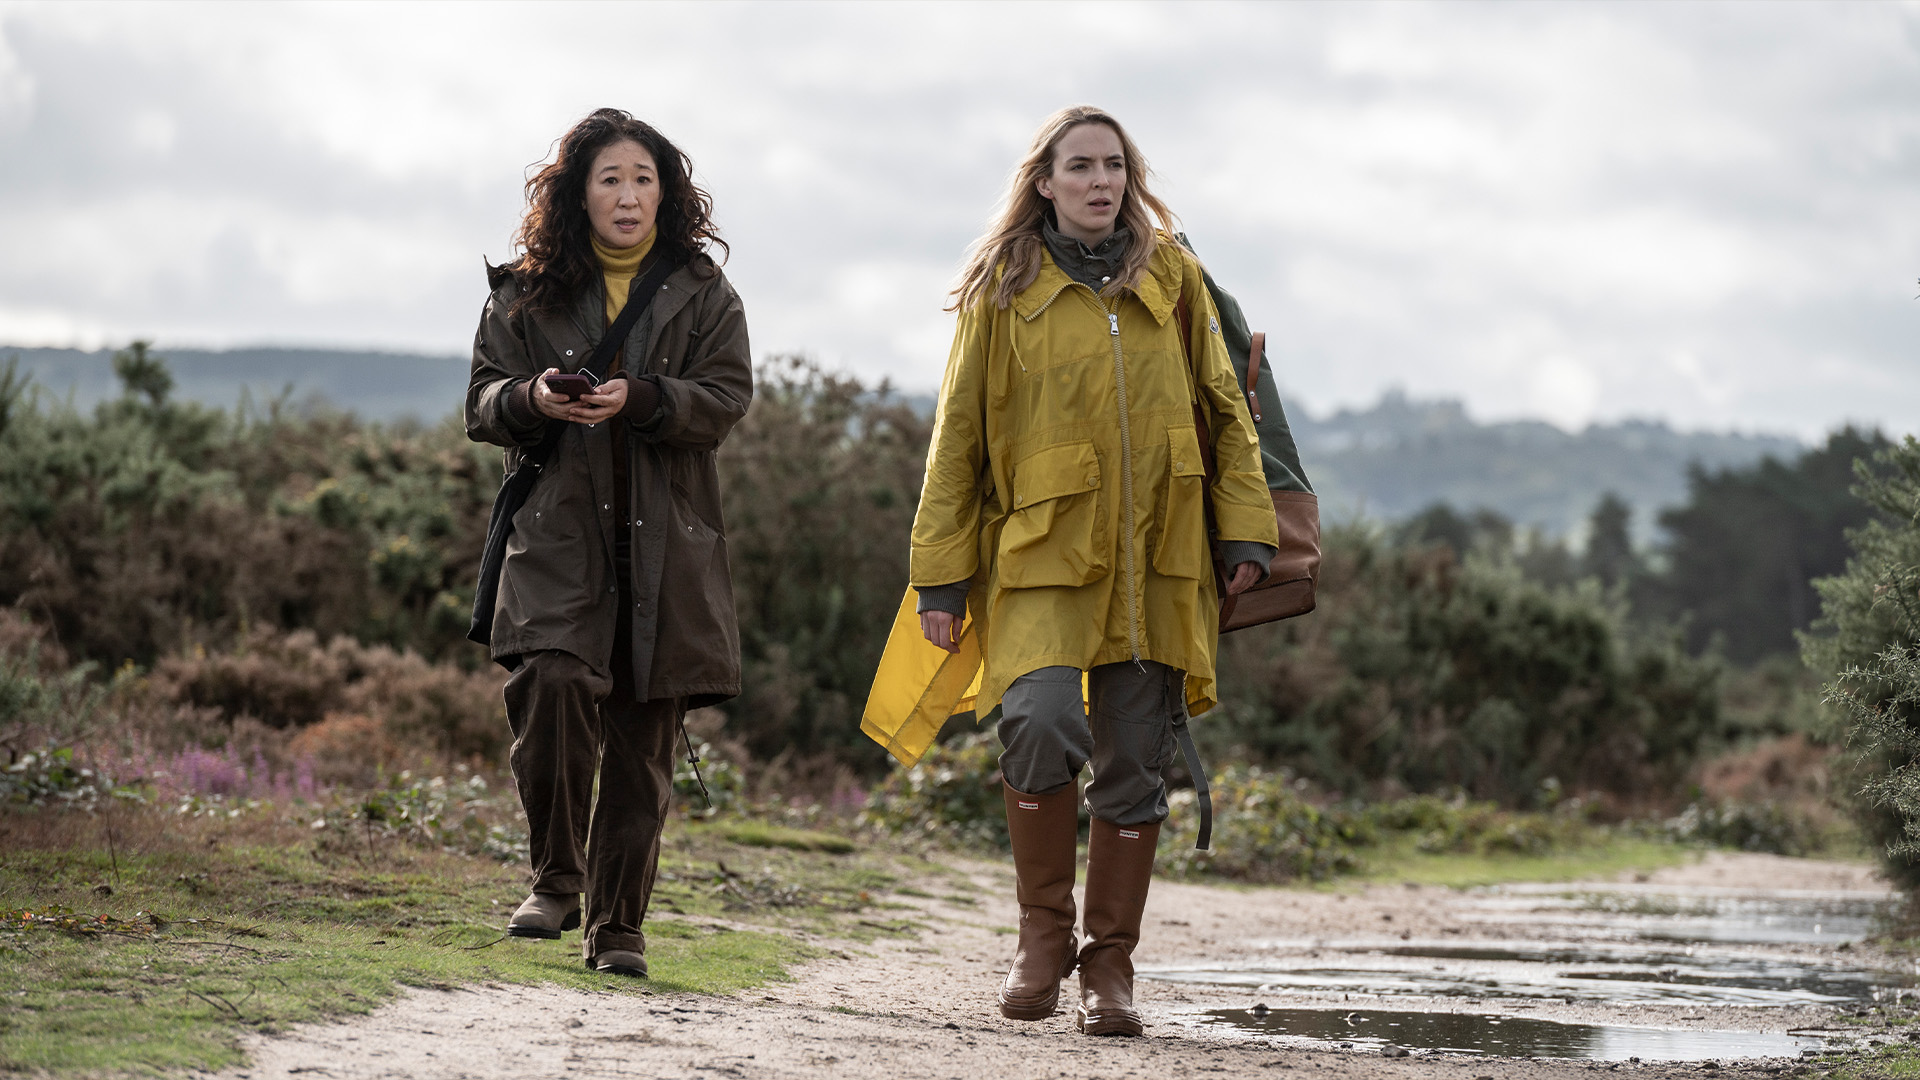 Hello, Losers, Eve and Villanelle focus on a shared mission., TV-14, Season 1052528, Episode 8